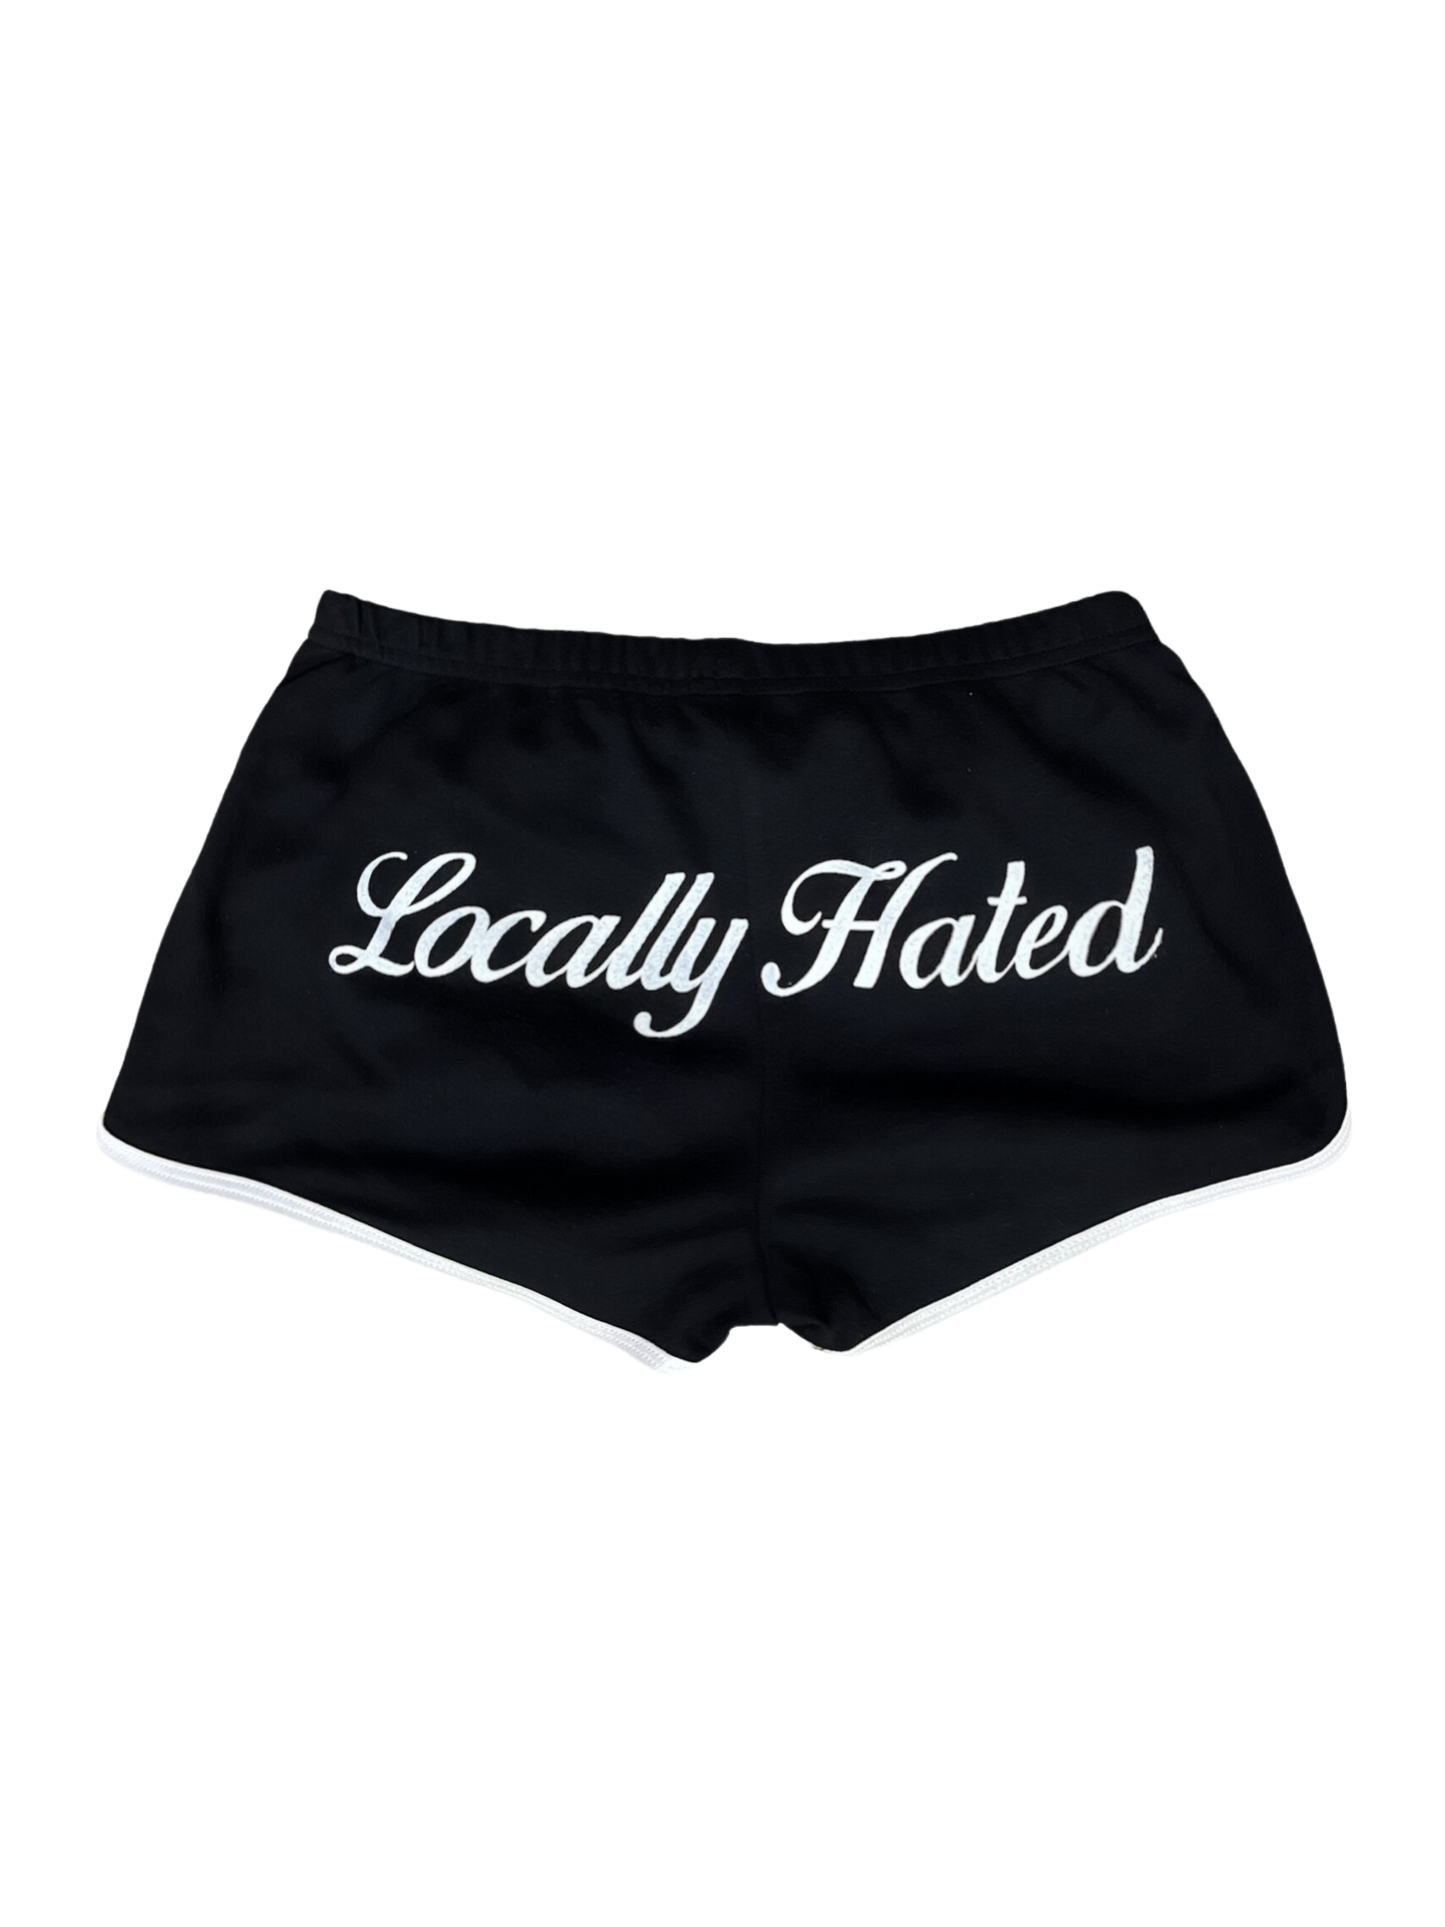 Locally Hated Shorts